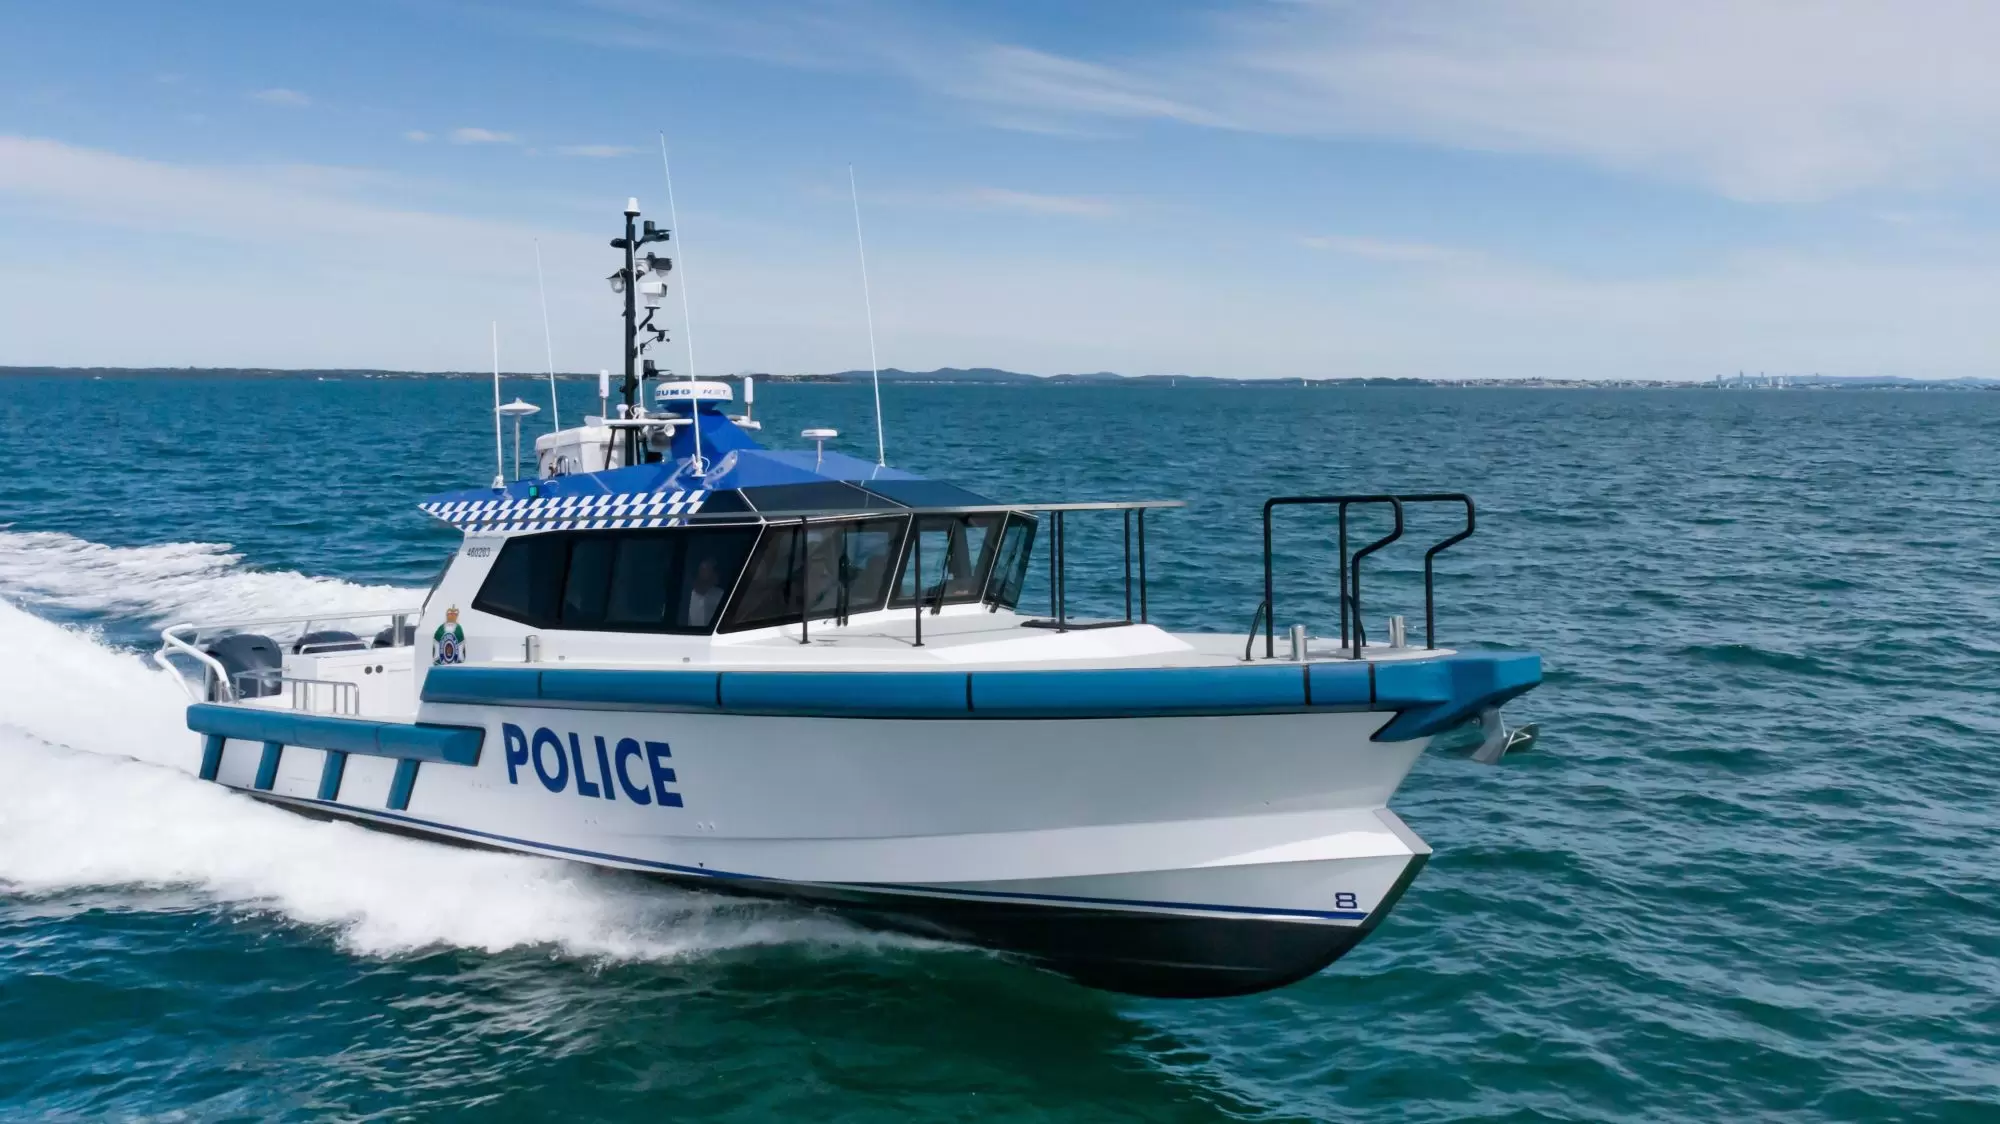 The Queensland Police Service